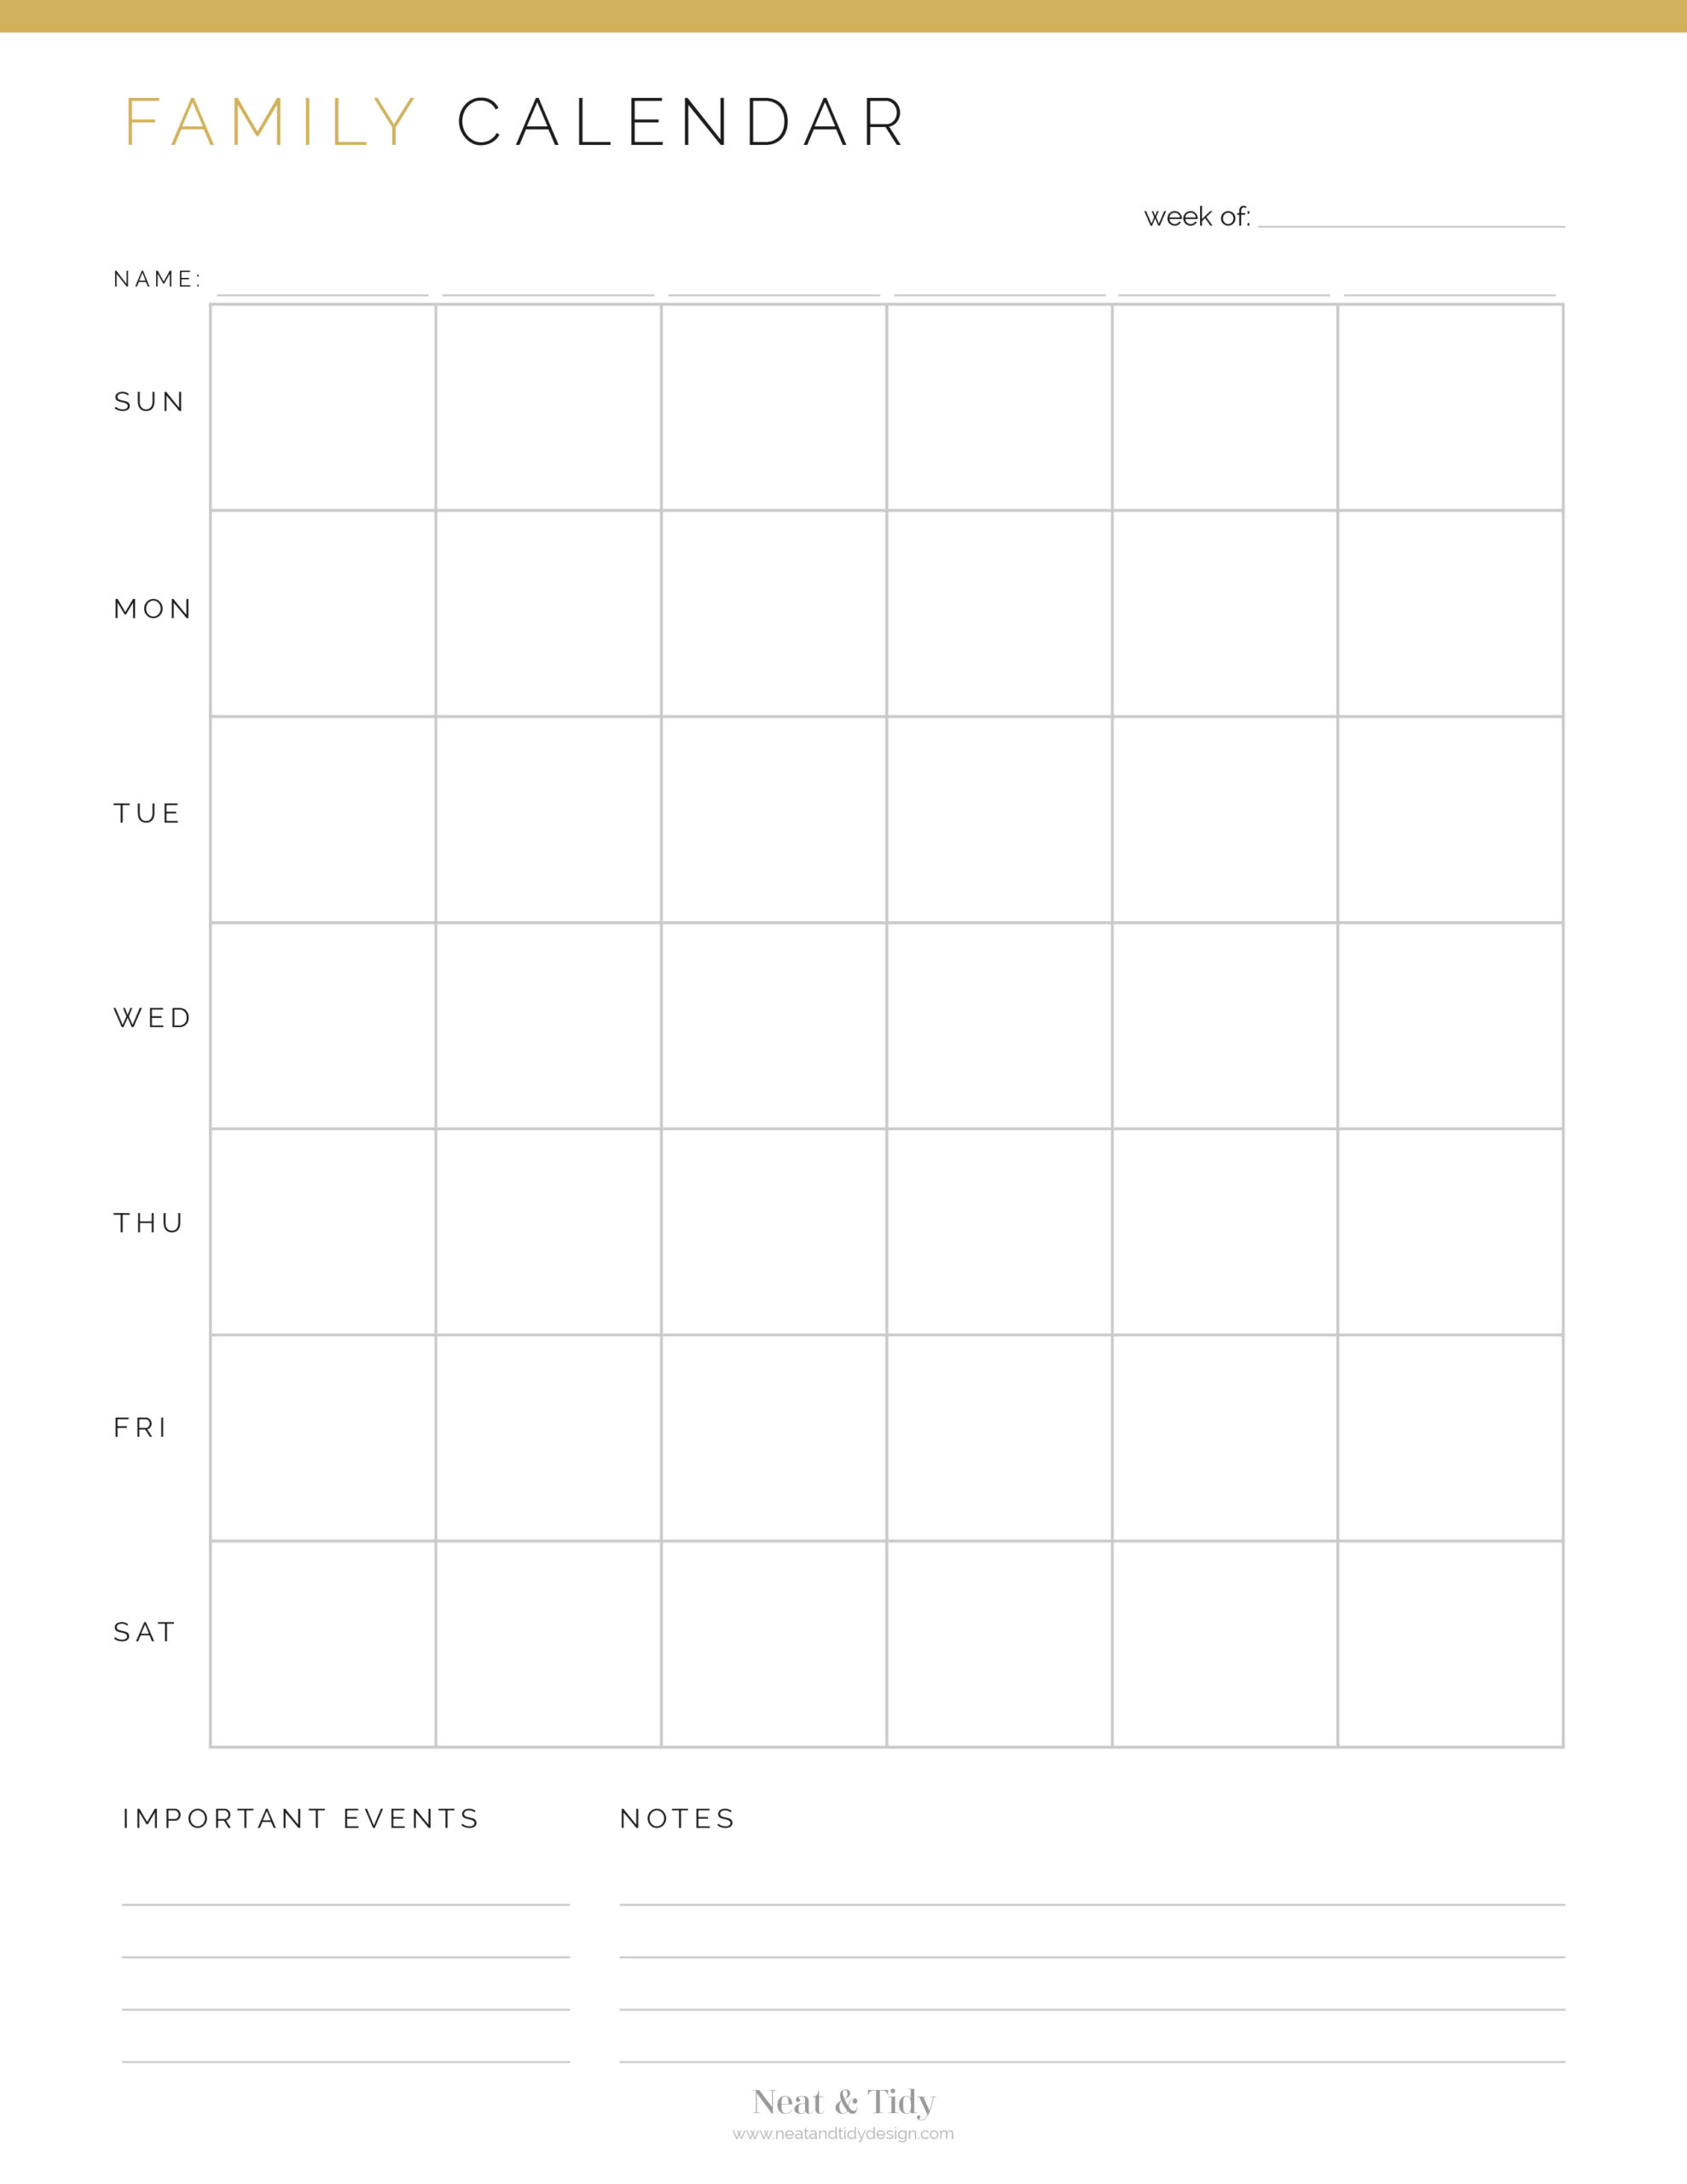 weekly-family-calendar-neat-and-tidy-design